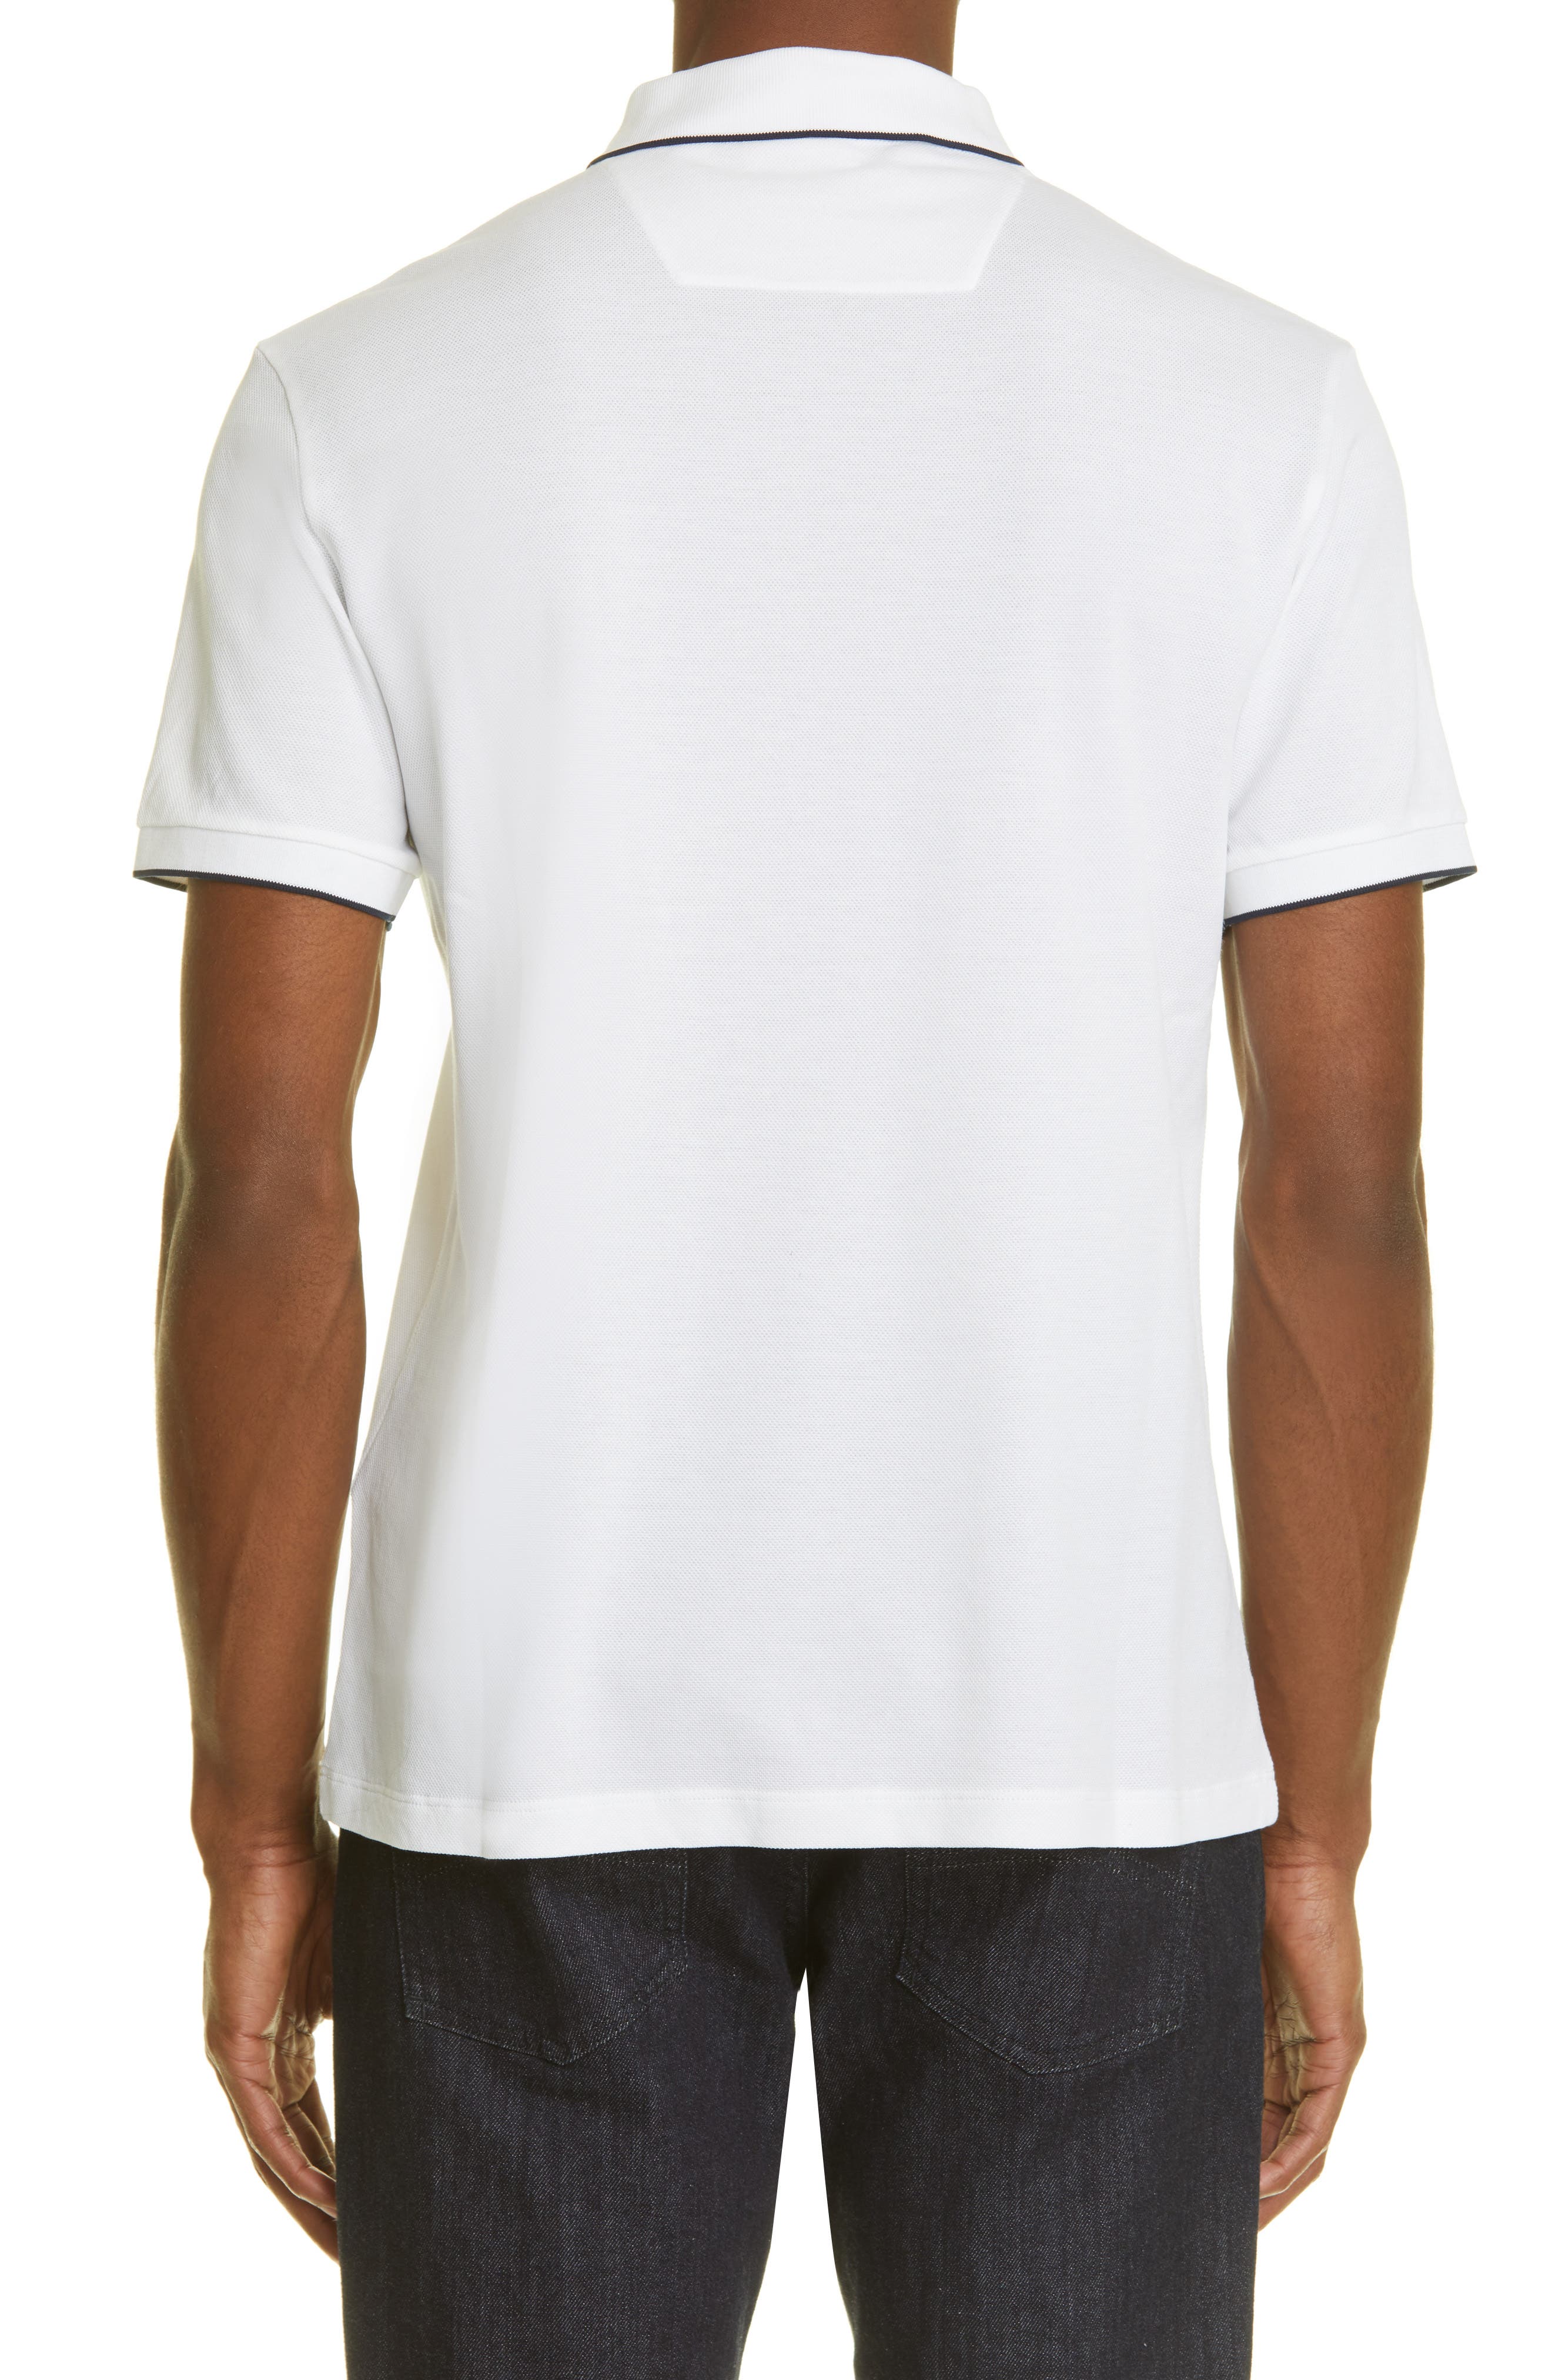 Nautica Mens Short Sleeve Performance Pique Polo with Tipping